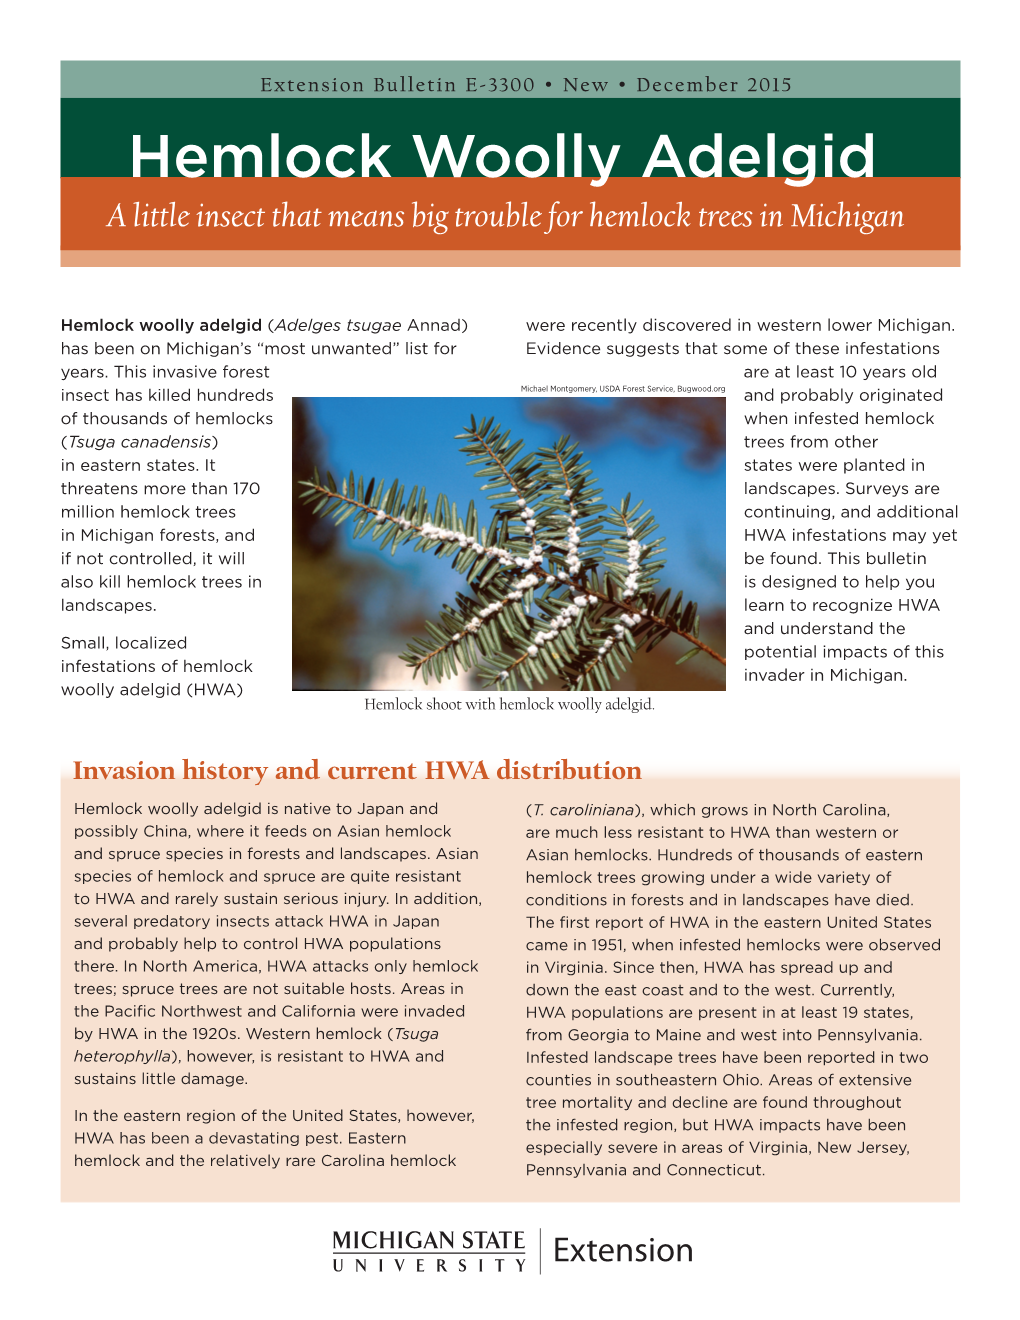 Hemlock Woolly Adelgid. a Little Insect That Means Big Trouble for Hemlock Trees in Michigan